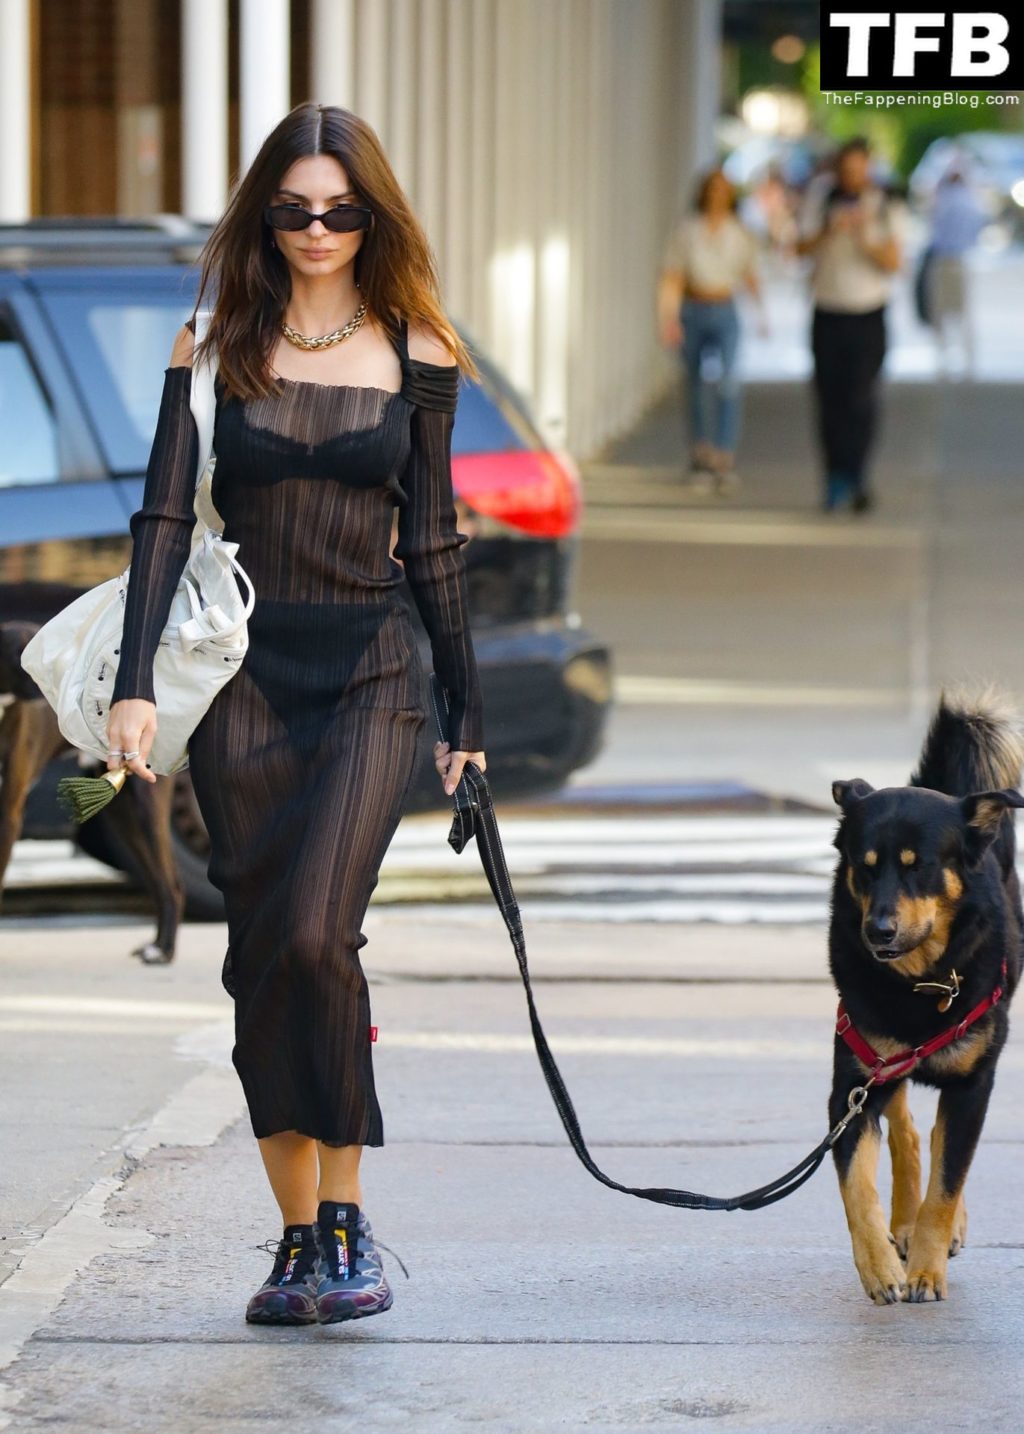 Emily Ratajkowski Sexy The Fappening Blog 8 2 1024x1434 - Emily Ratajkowski Bares It All in a See-Through Dress While Out Walking Her Dog in New York (33 Photos)